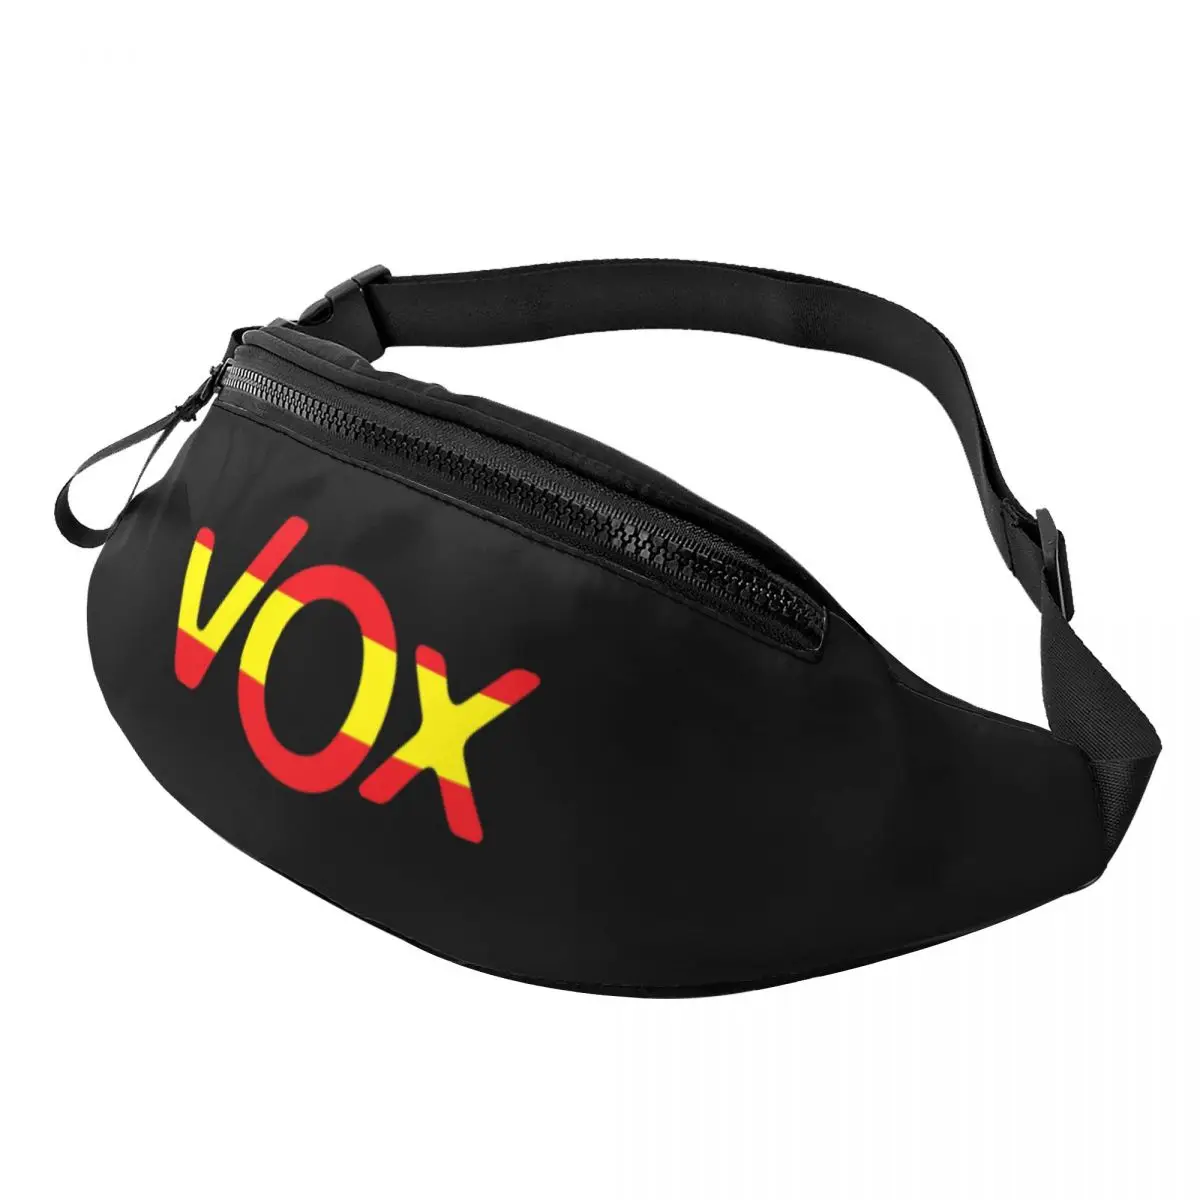 

Cool Spain Vox Flag Fanny Pack Men Women Spanish Political Party Crossbody Waist Bag for Travel Cycling Phone Money Pouch